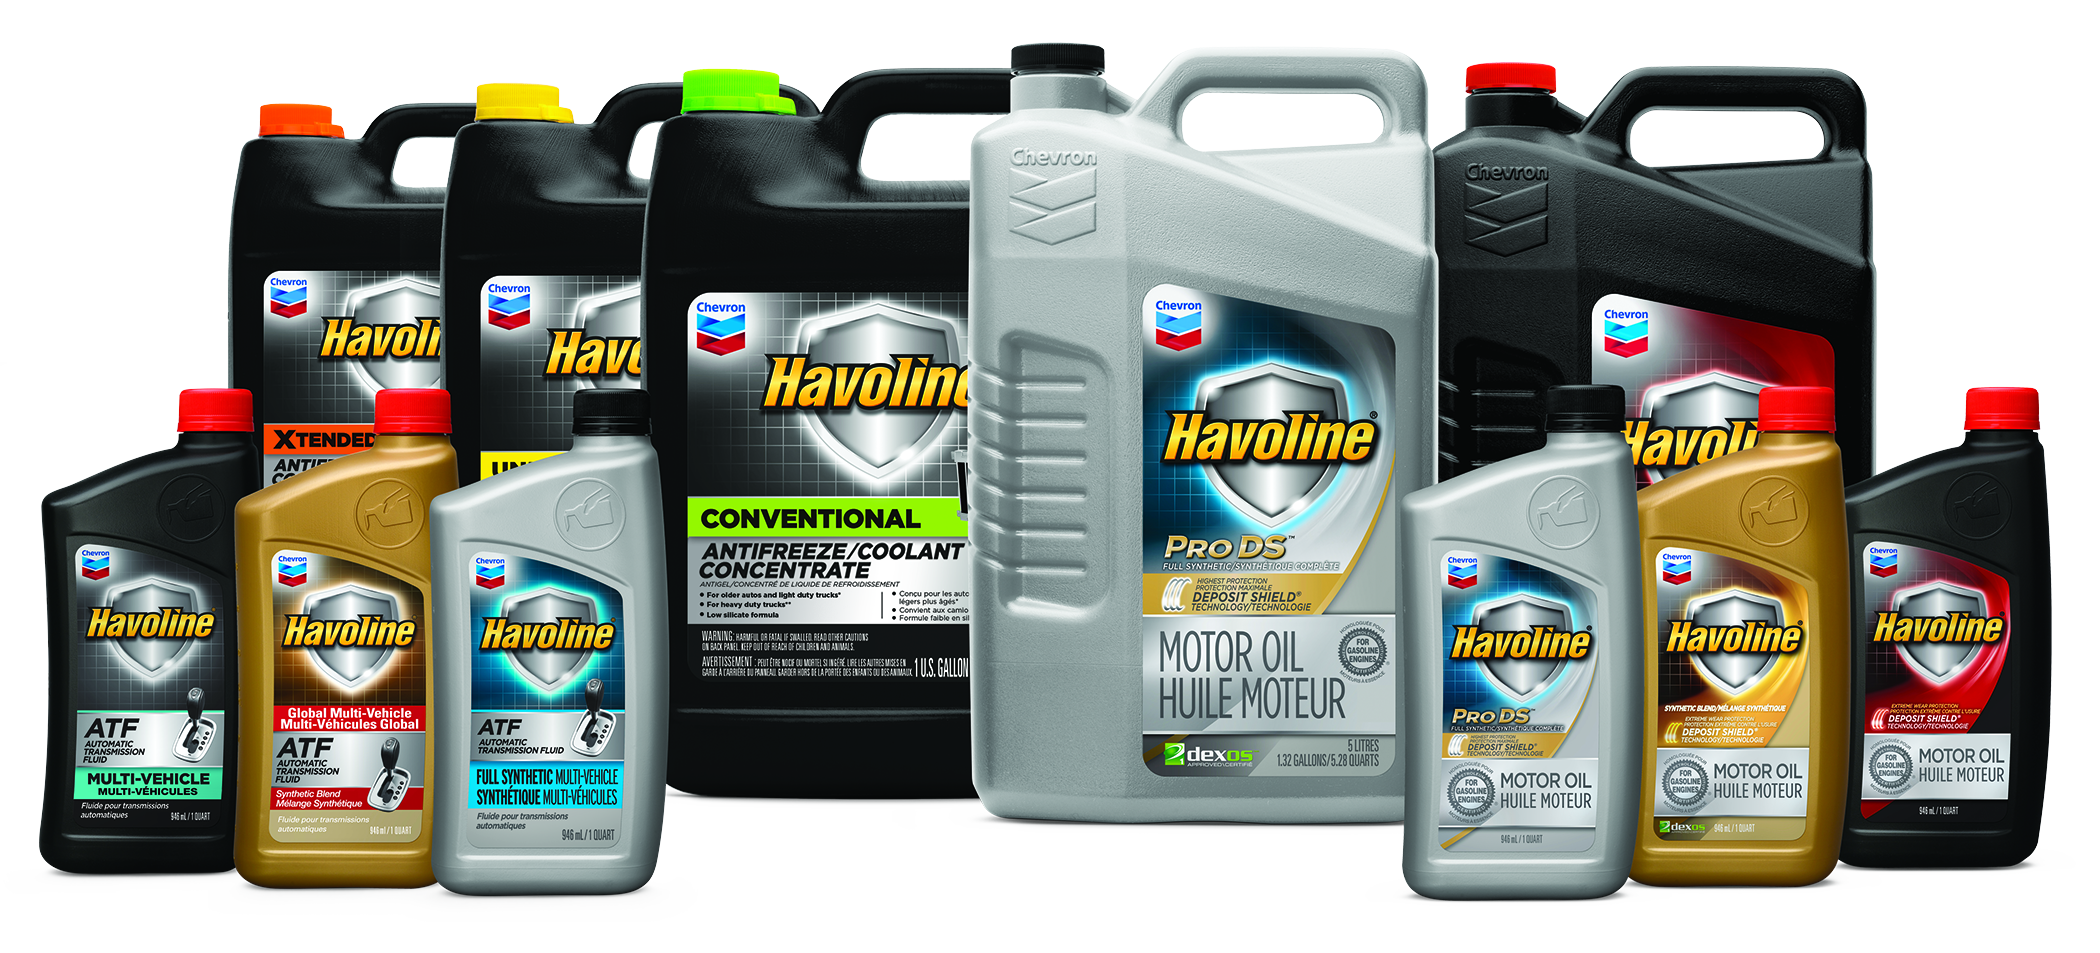 Havoline Products Family